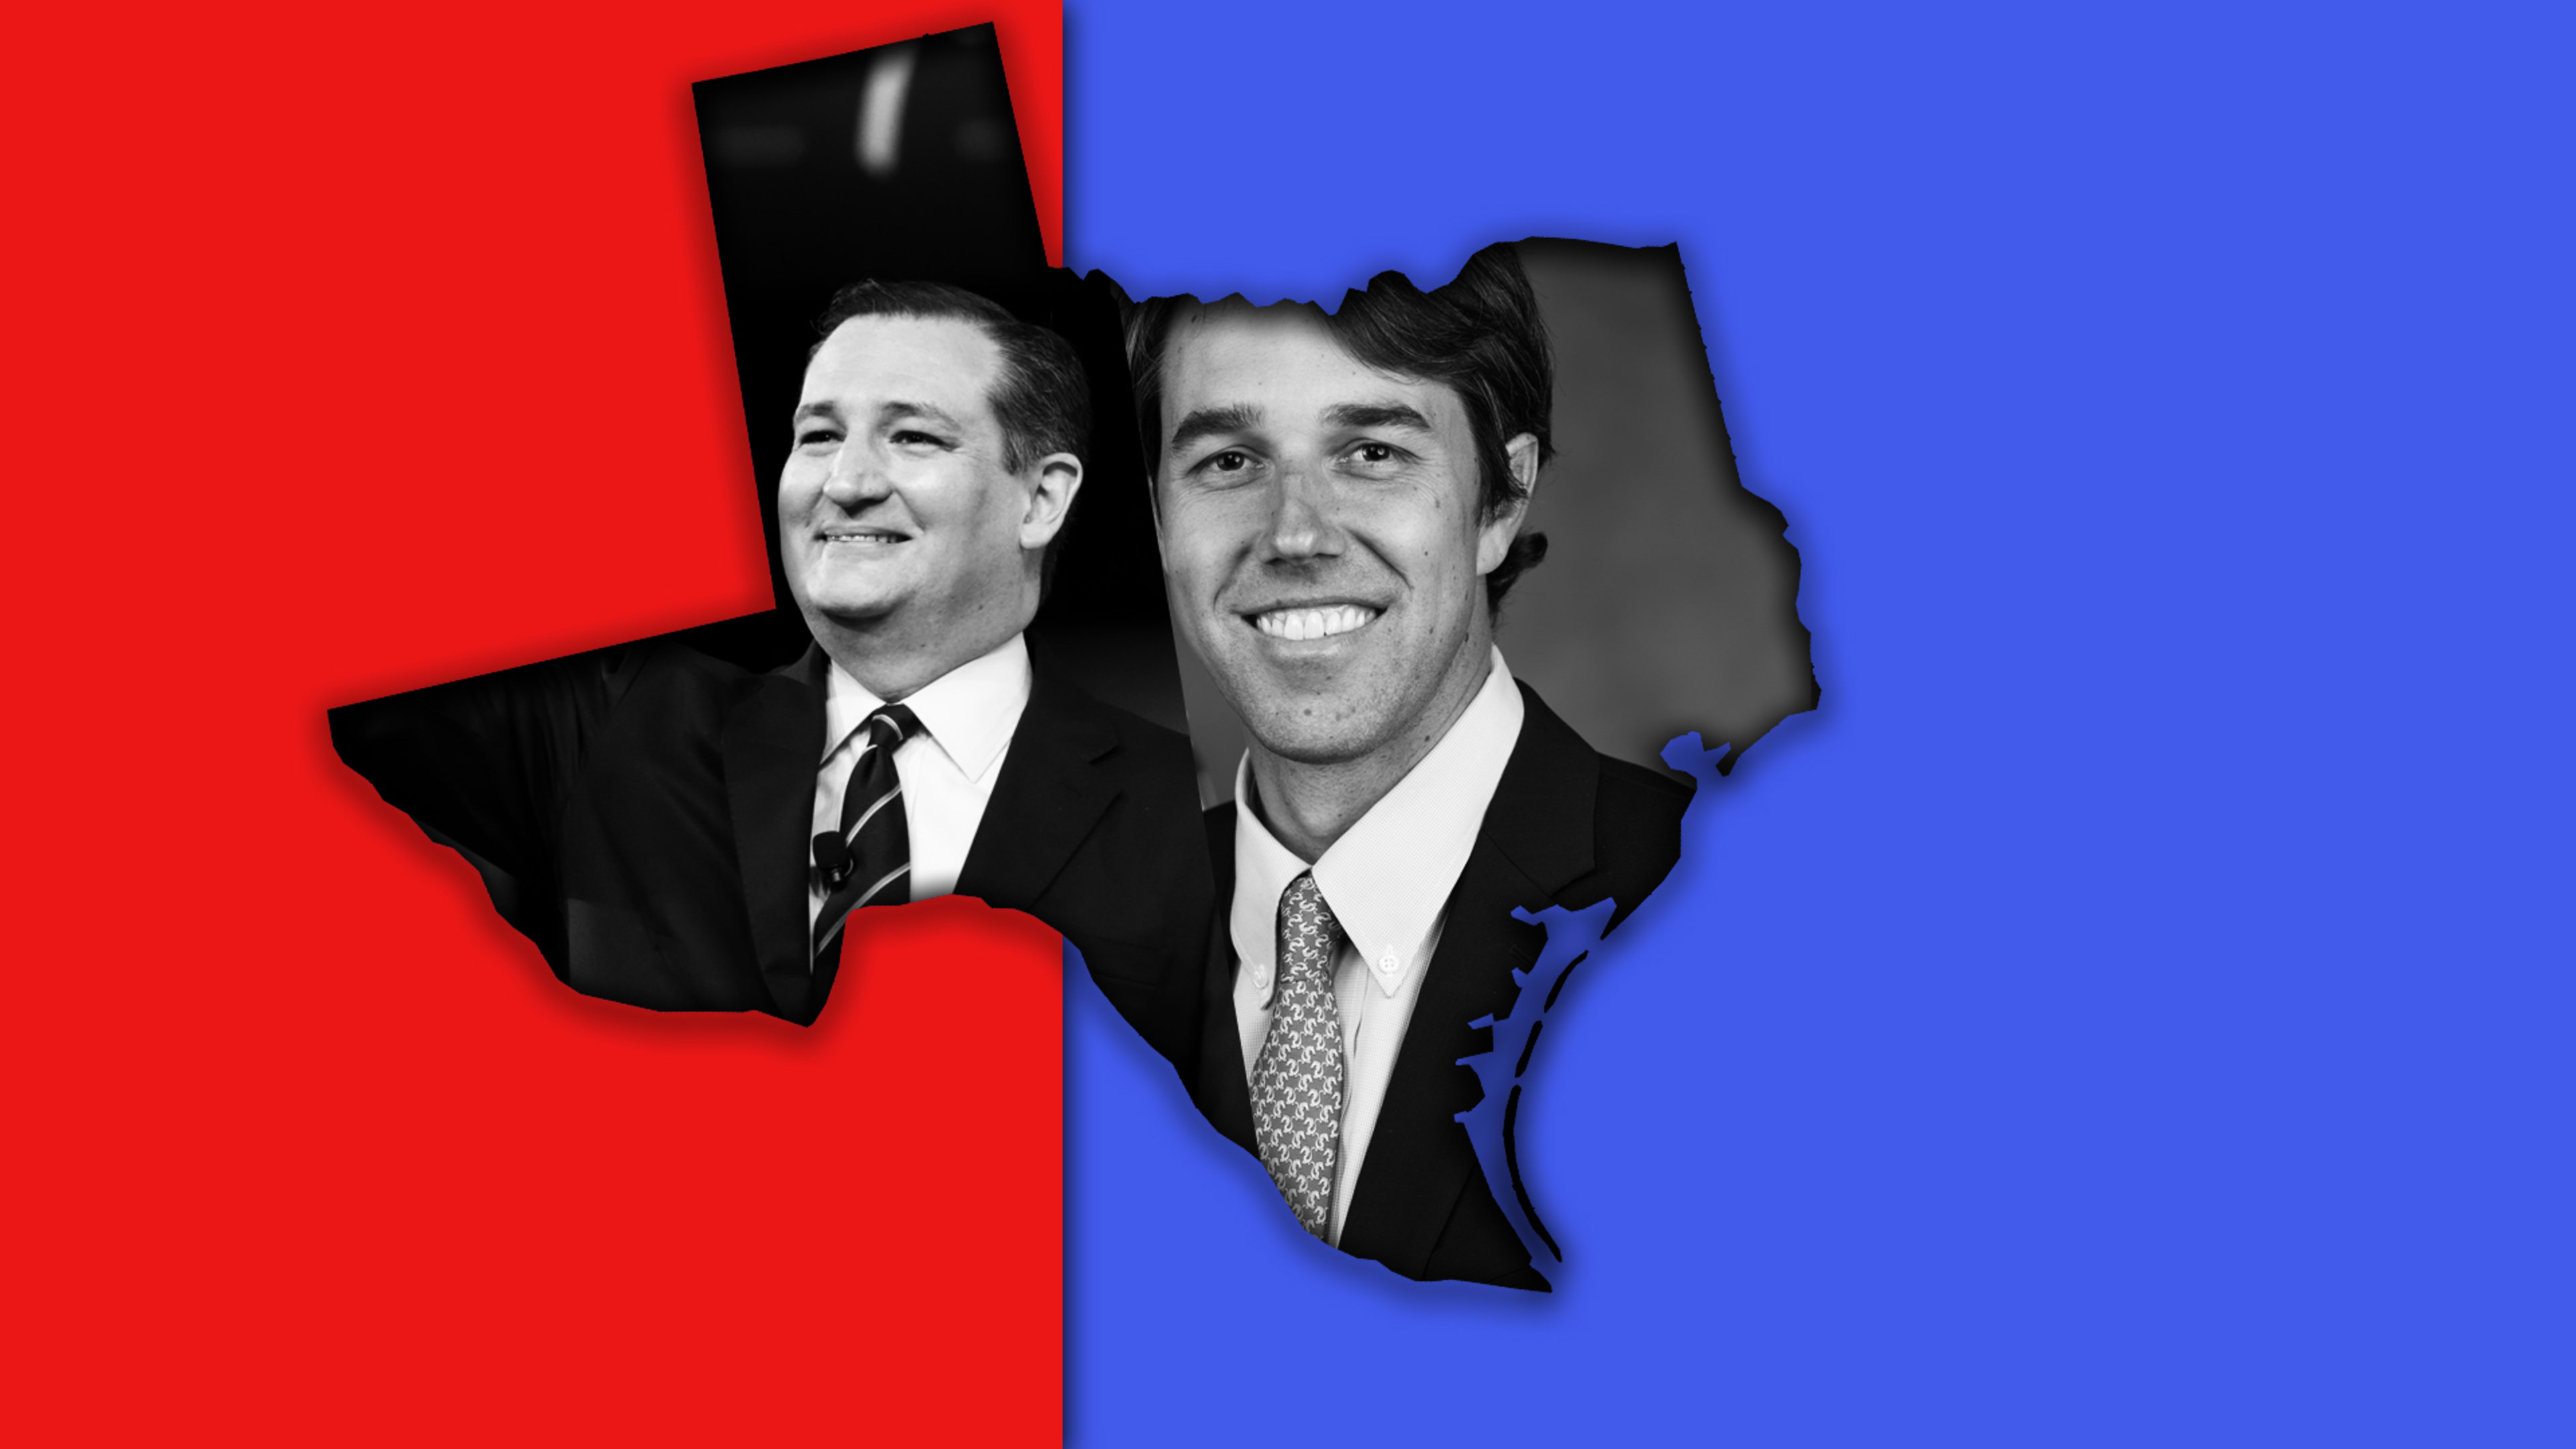 Beto O’Rourke’s and Ted Cruz’s battle for Texas is the podcast America needs right now